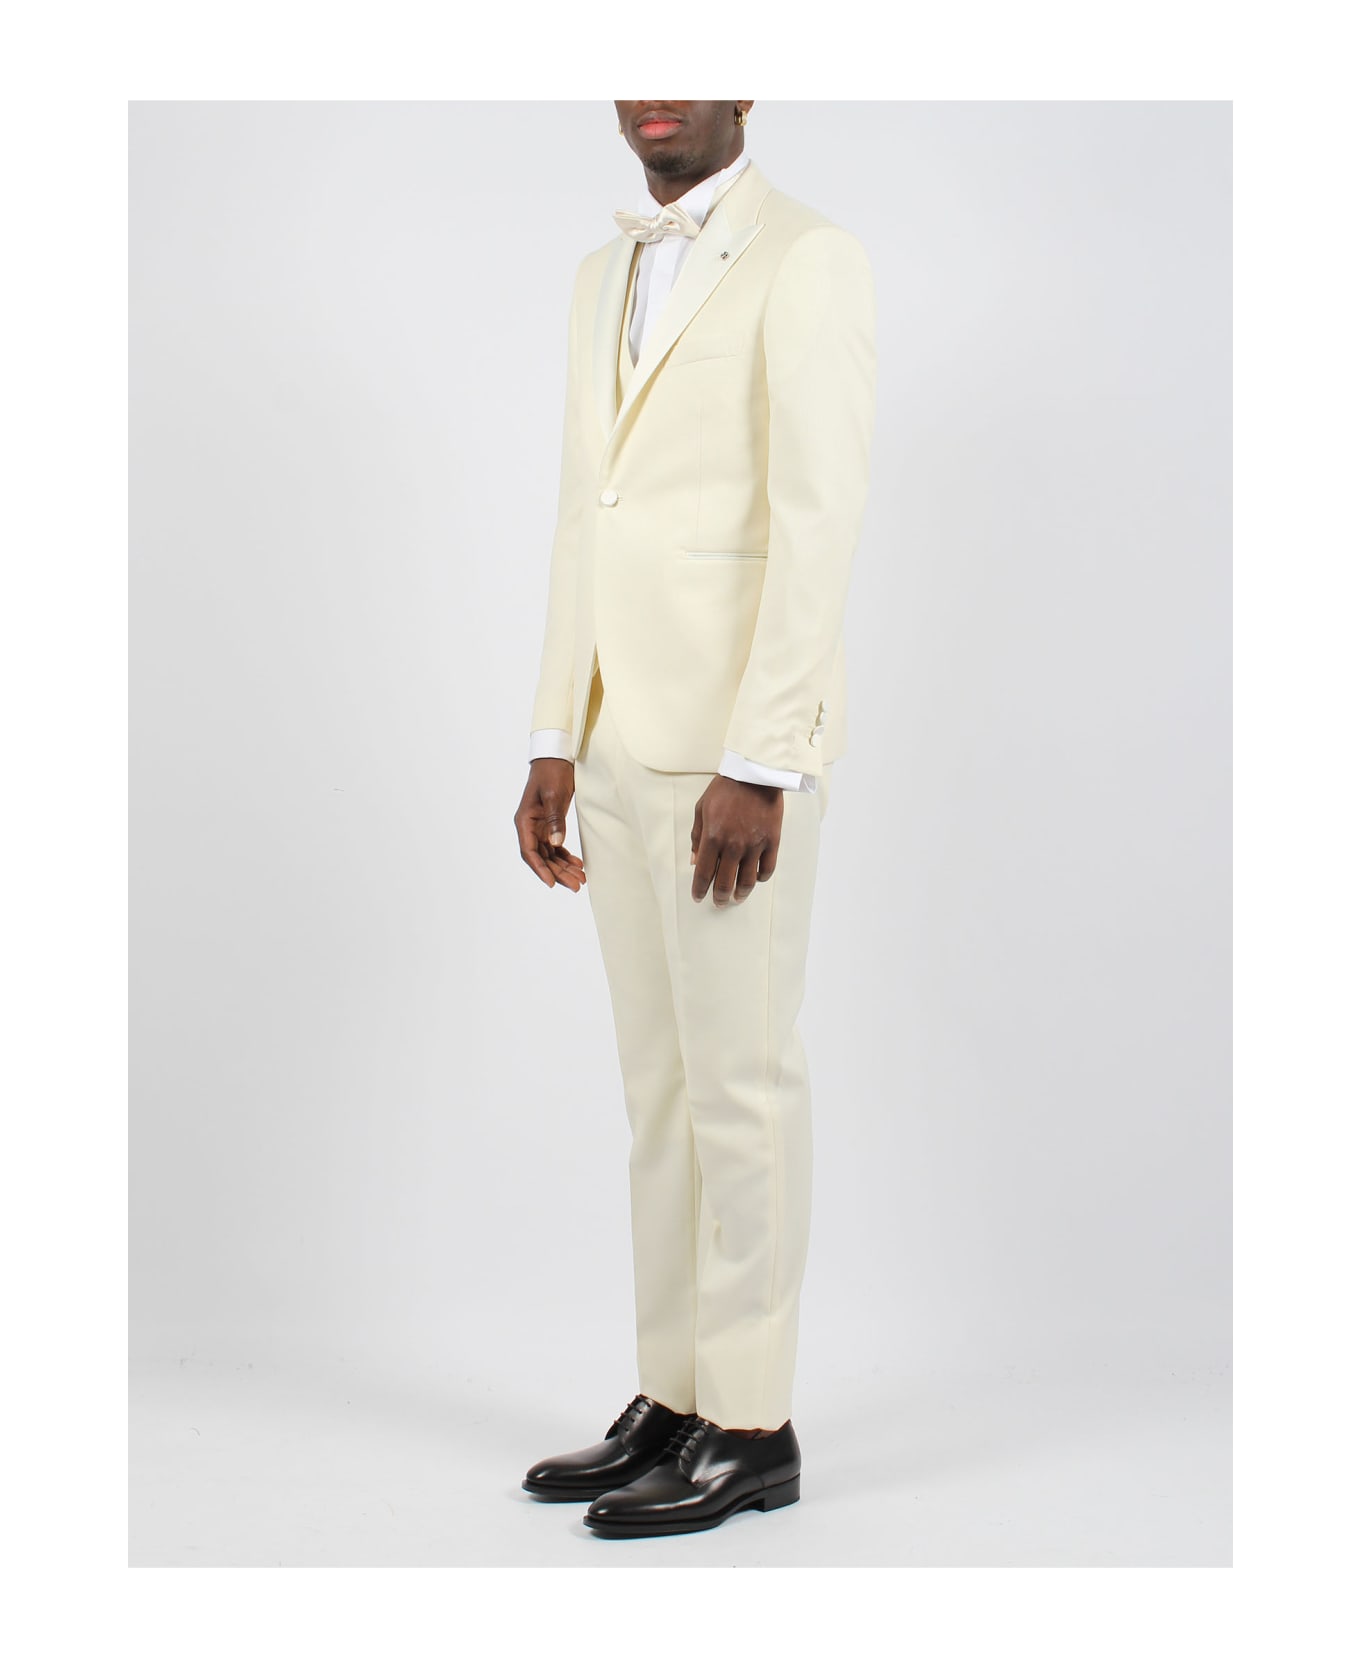 Tagliatore 3 Pieces Single Breasted Tailored Suit - White